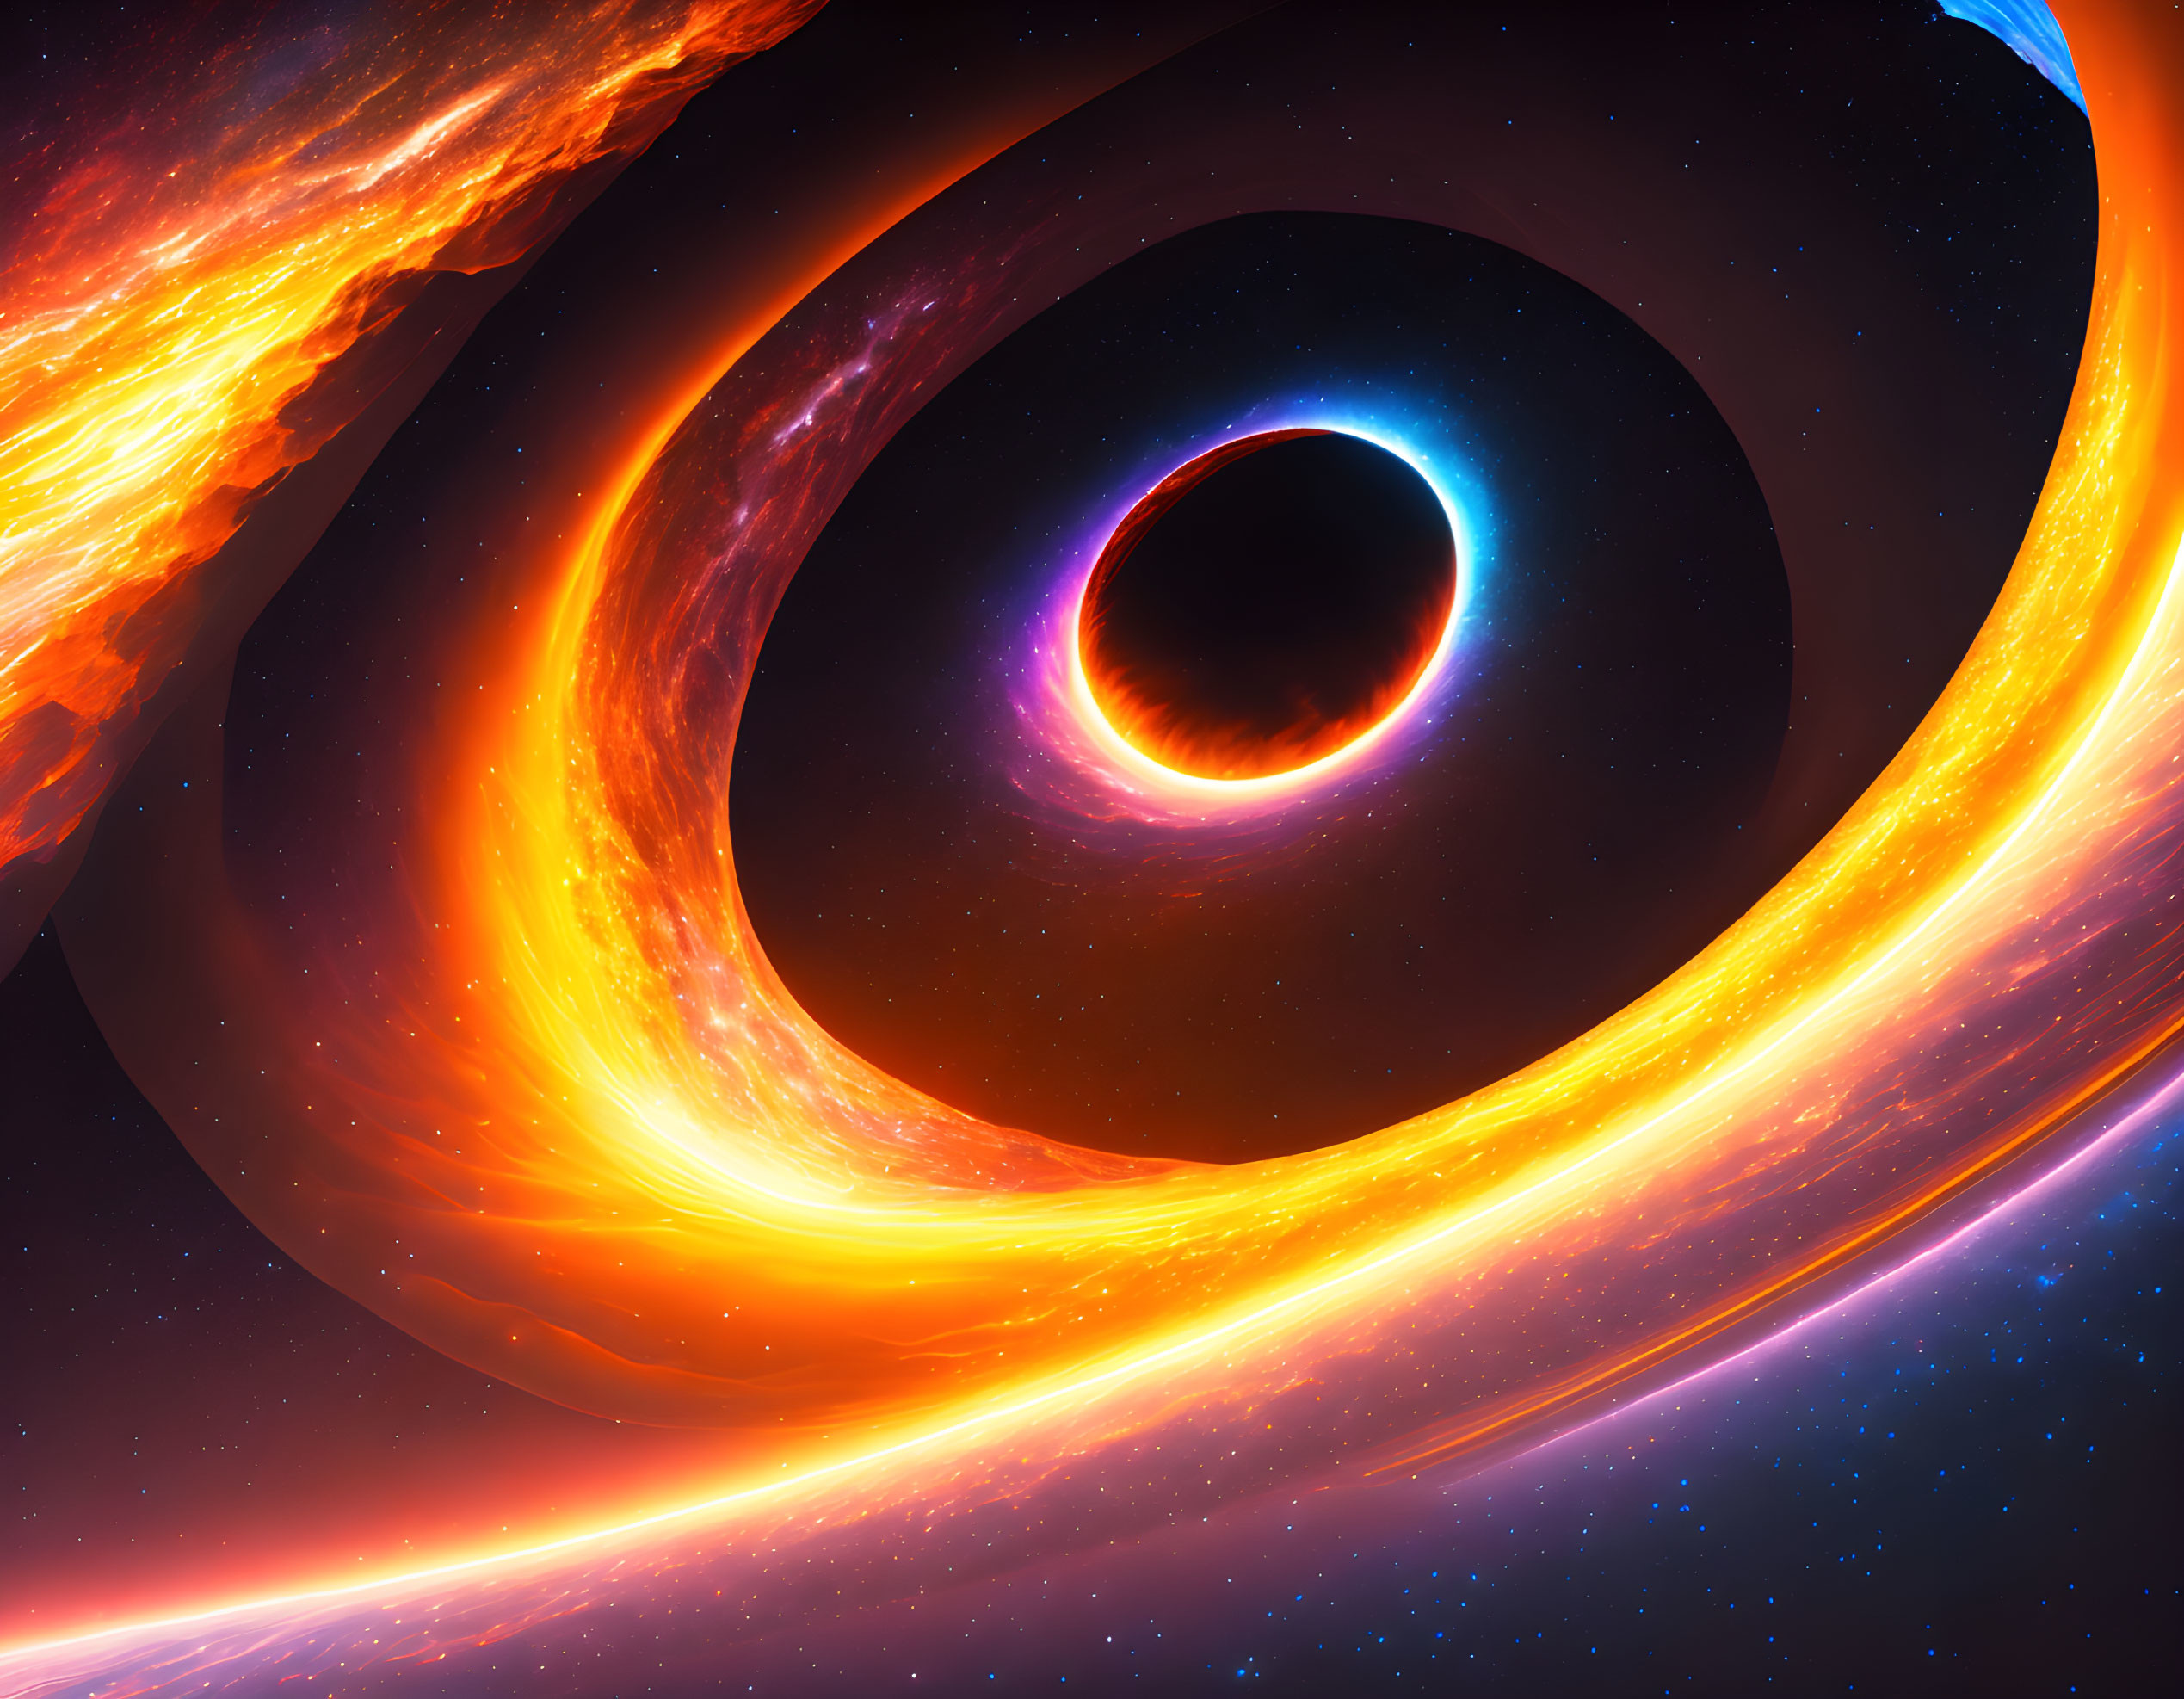 Colorful digital artwork of a black hole with swirling accretion disks in space